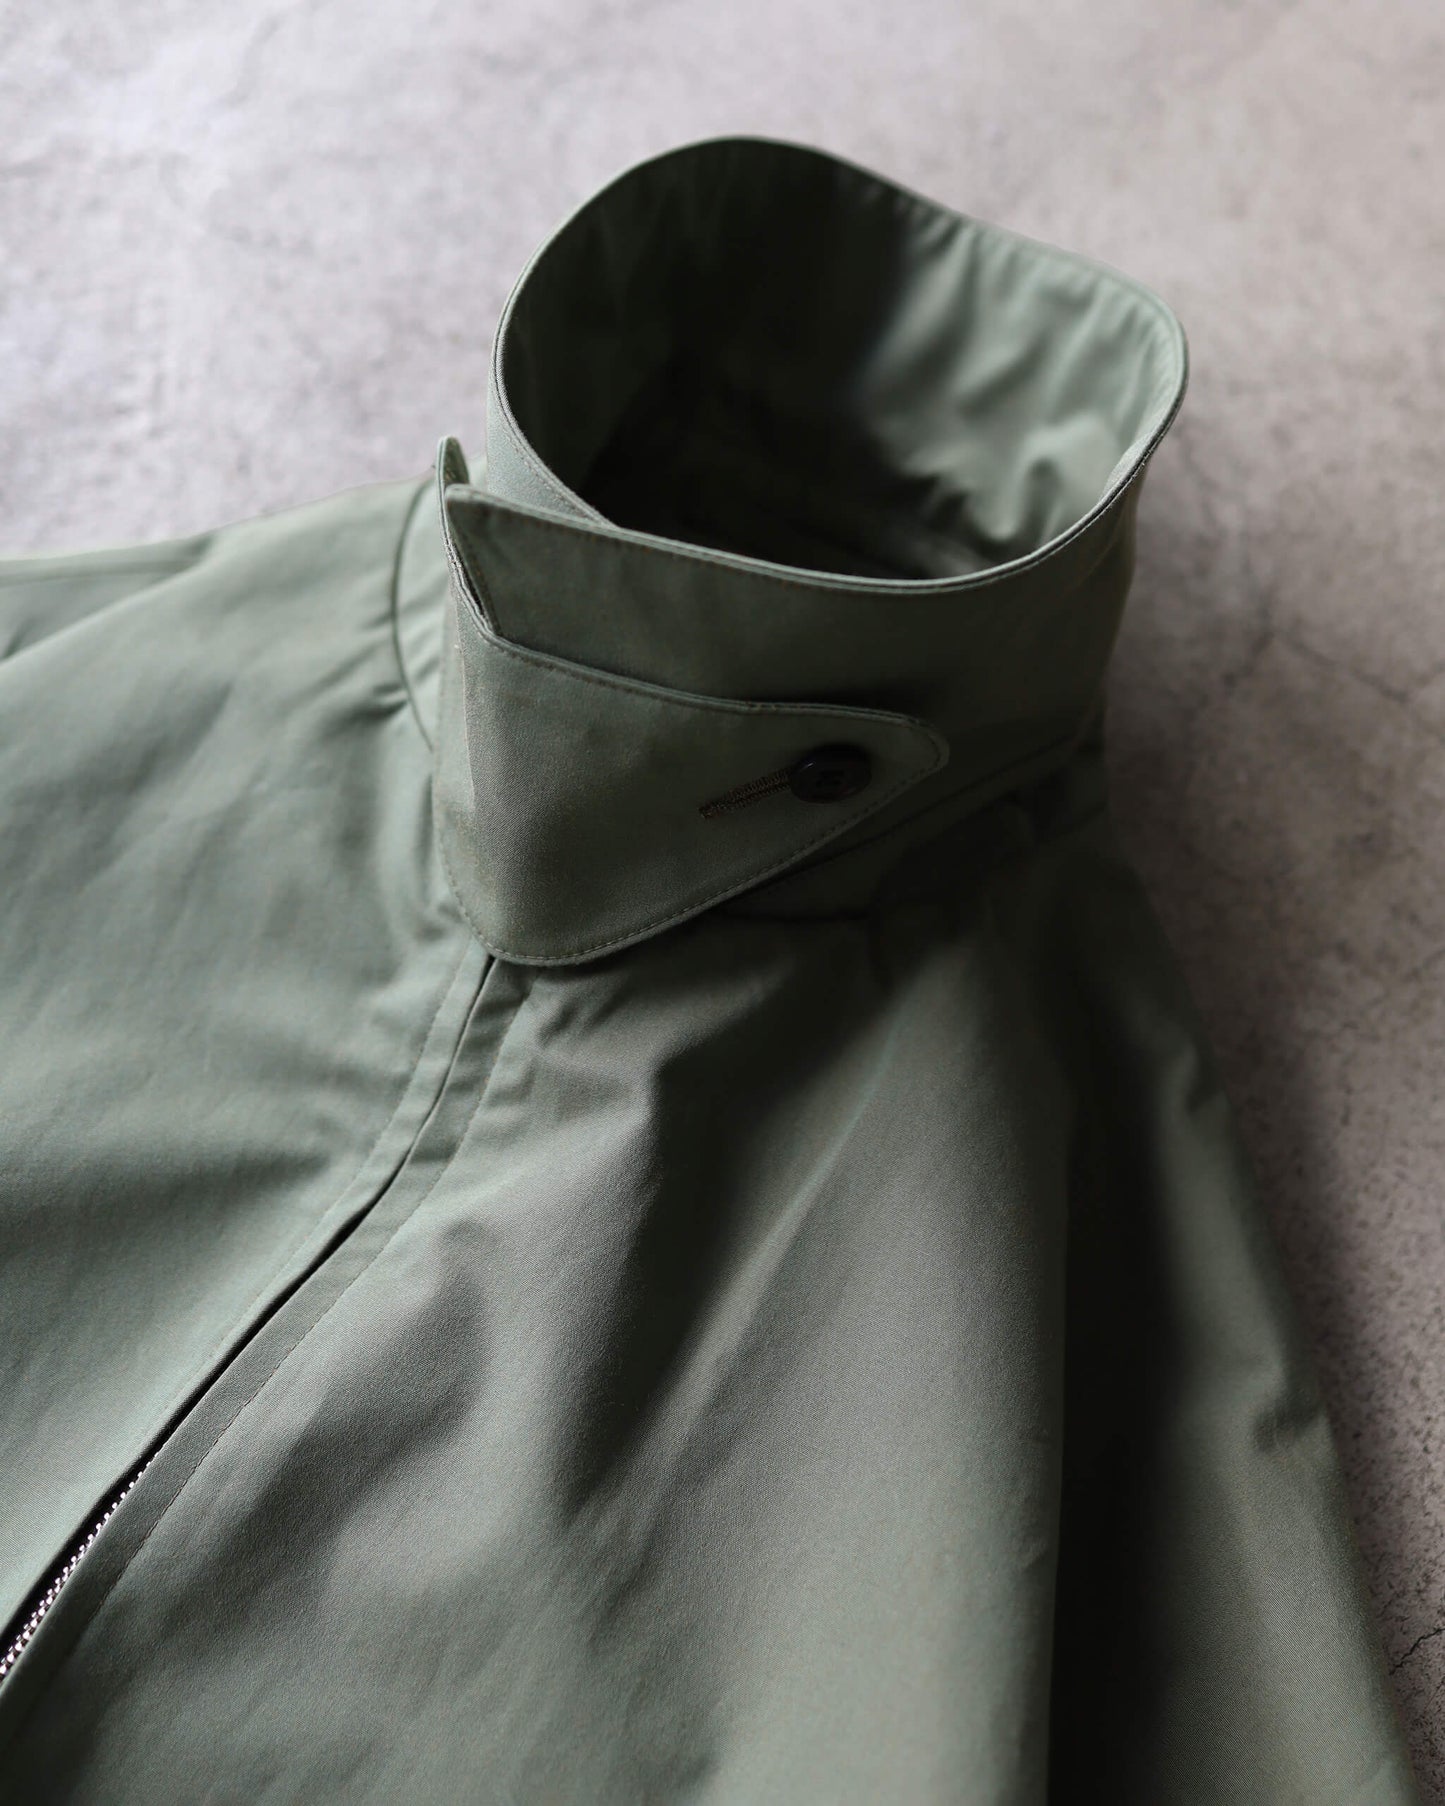 WIDE SPORTS JACKET ORGANIC COTTON LIGHT ALL WEATHER CLOTH "MOS GREEN"